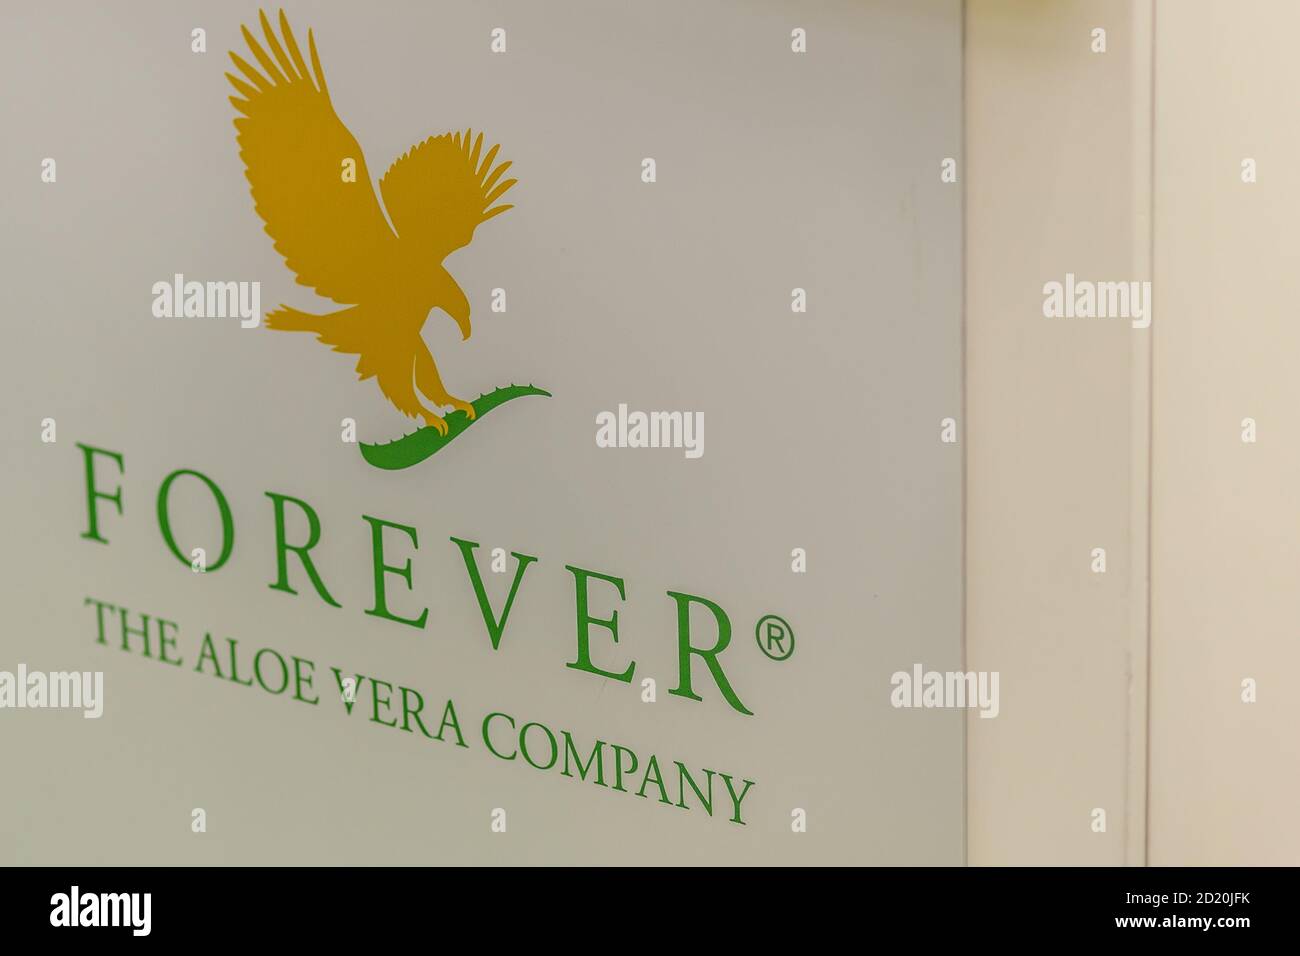 Forever the aloe vera company hi-res stock photography and images - Alamy